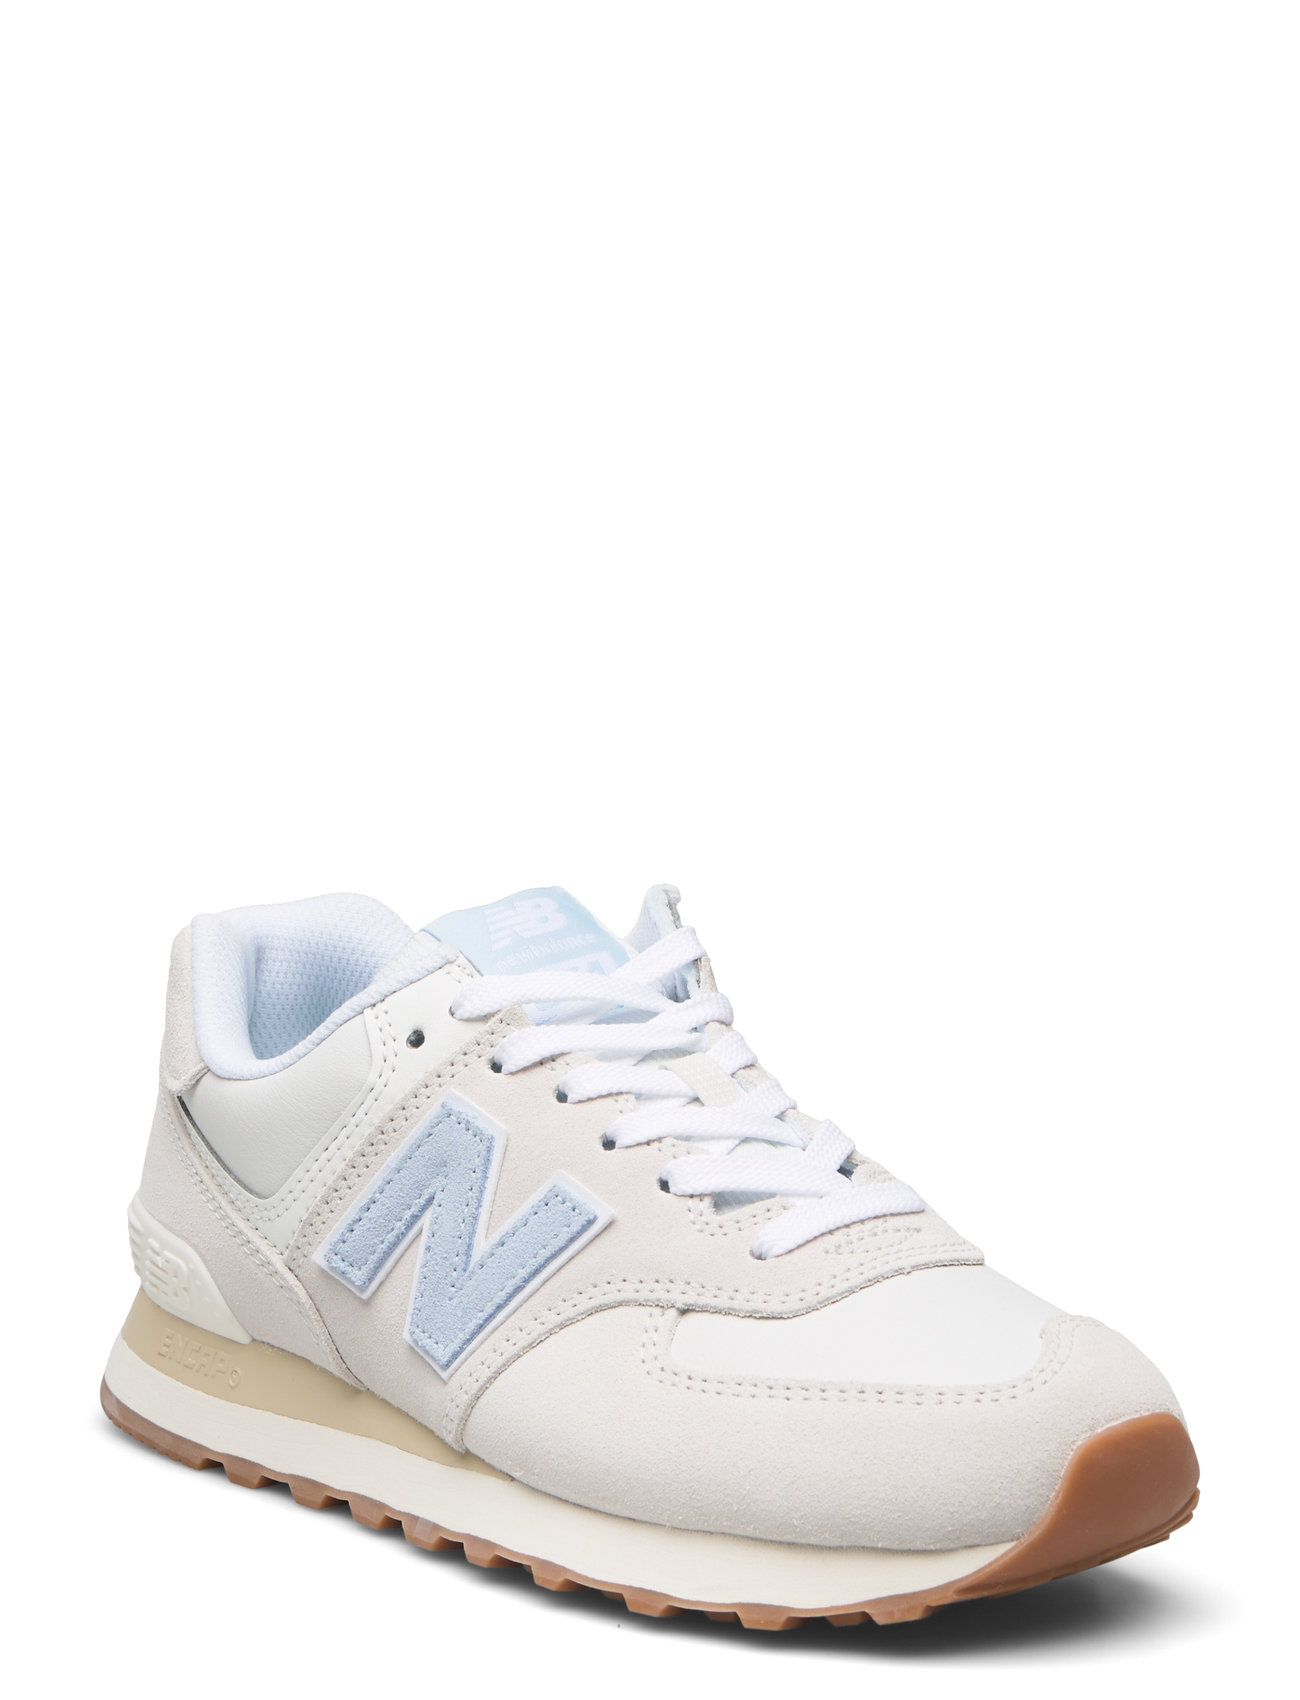 New Balance 574 Sport Sneakers Low-top Sneakers Cream New Balance